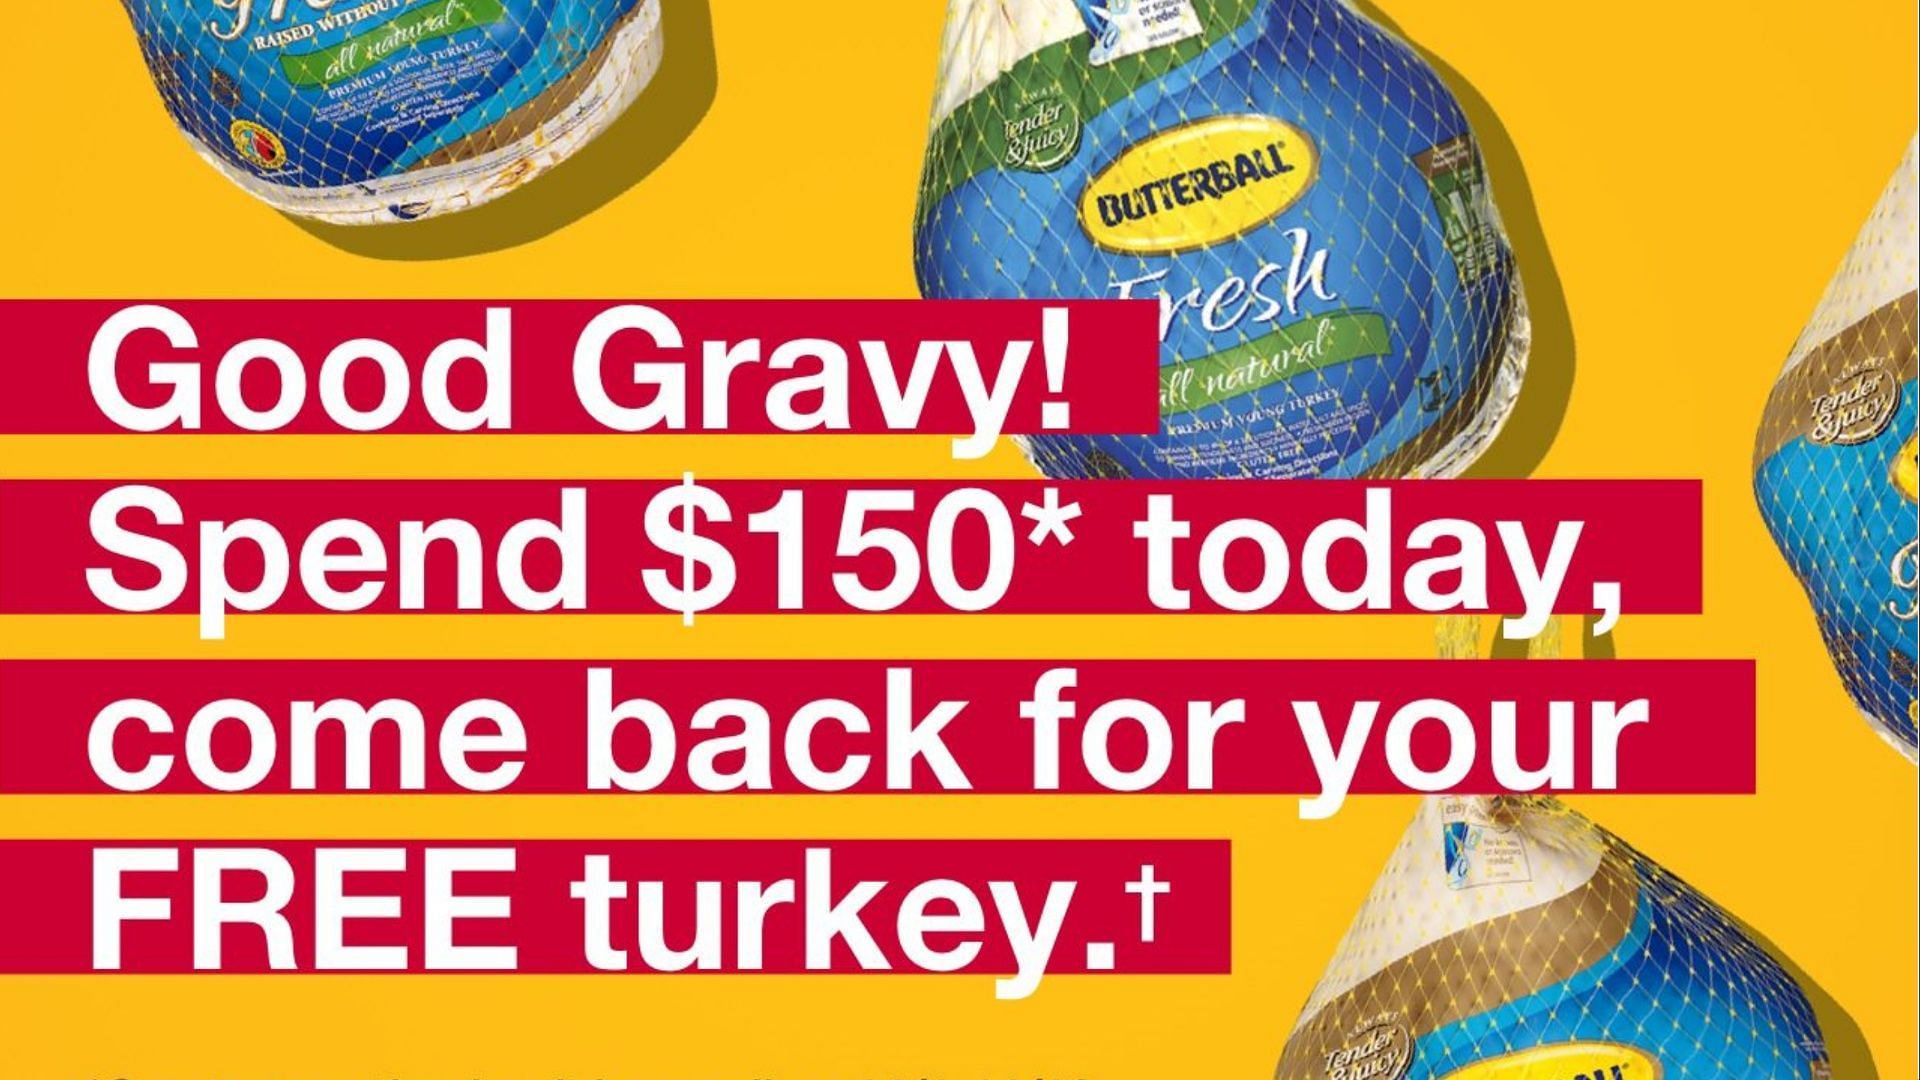 Butterball Premium Young Turkey All Natural Fresh